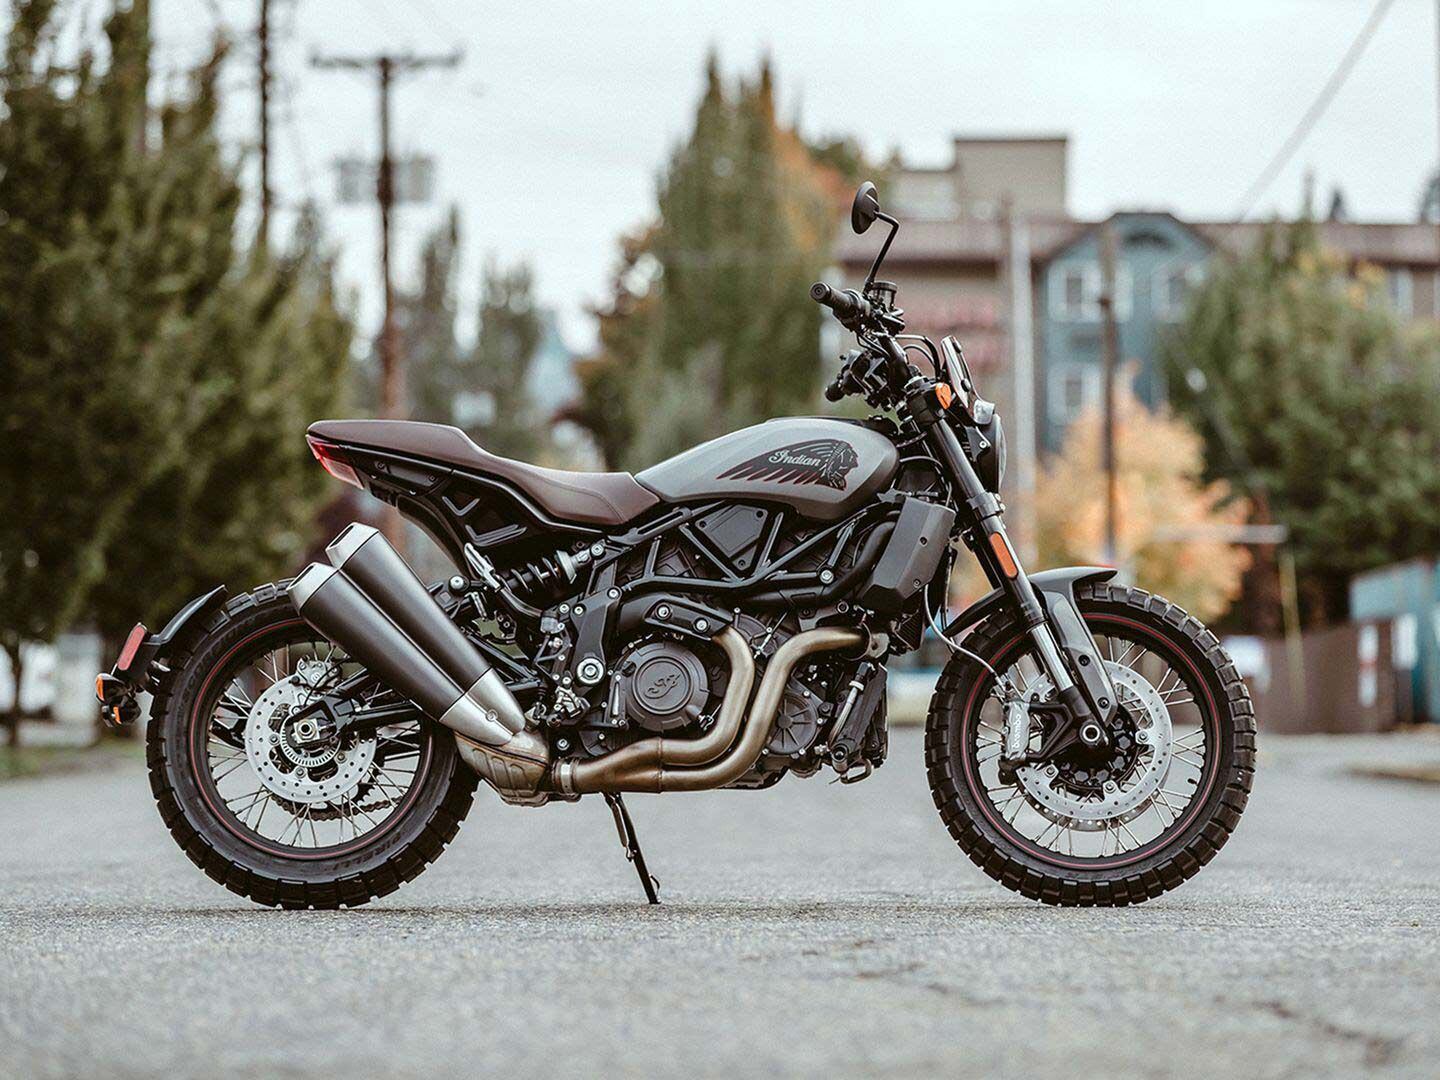 Different wheels, more suspension travel, and some unique styling cues differentiate Indian’s FTR Rally from the other FTRs.